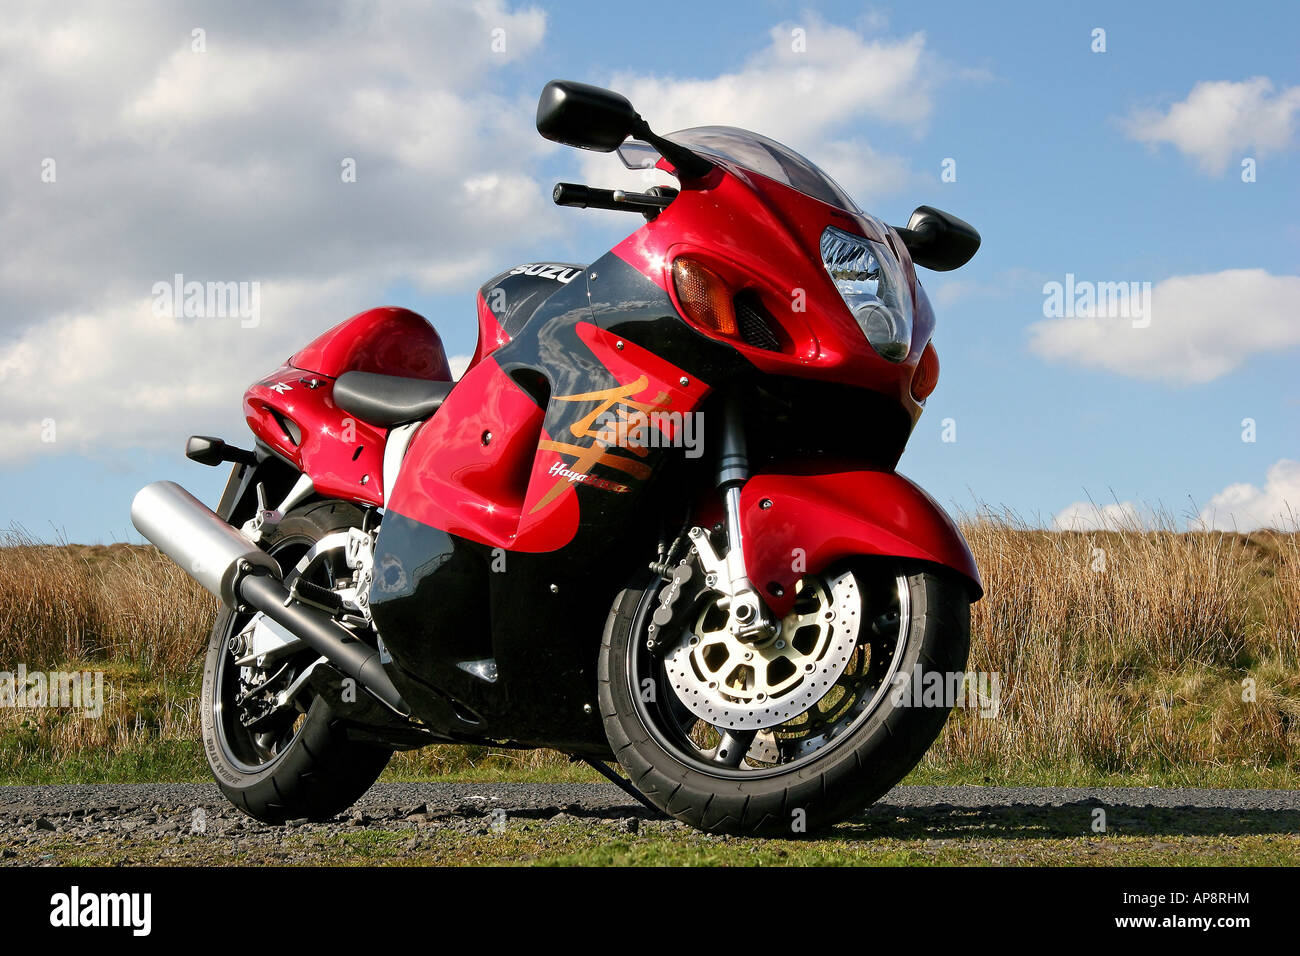 High Performance Motorcycle Stock Photo